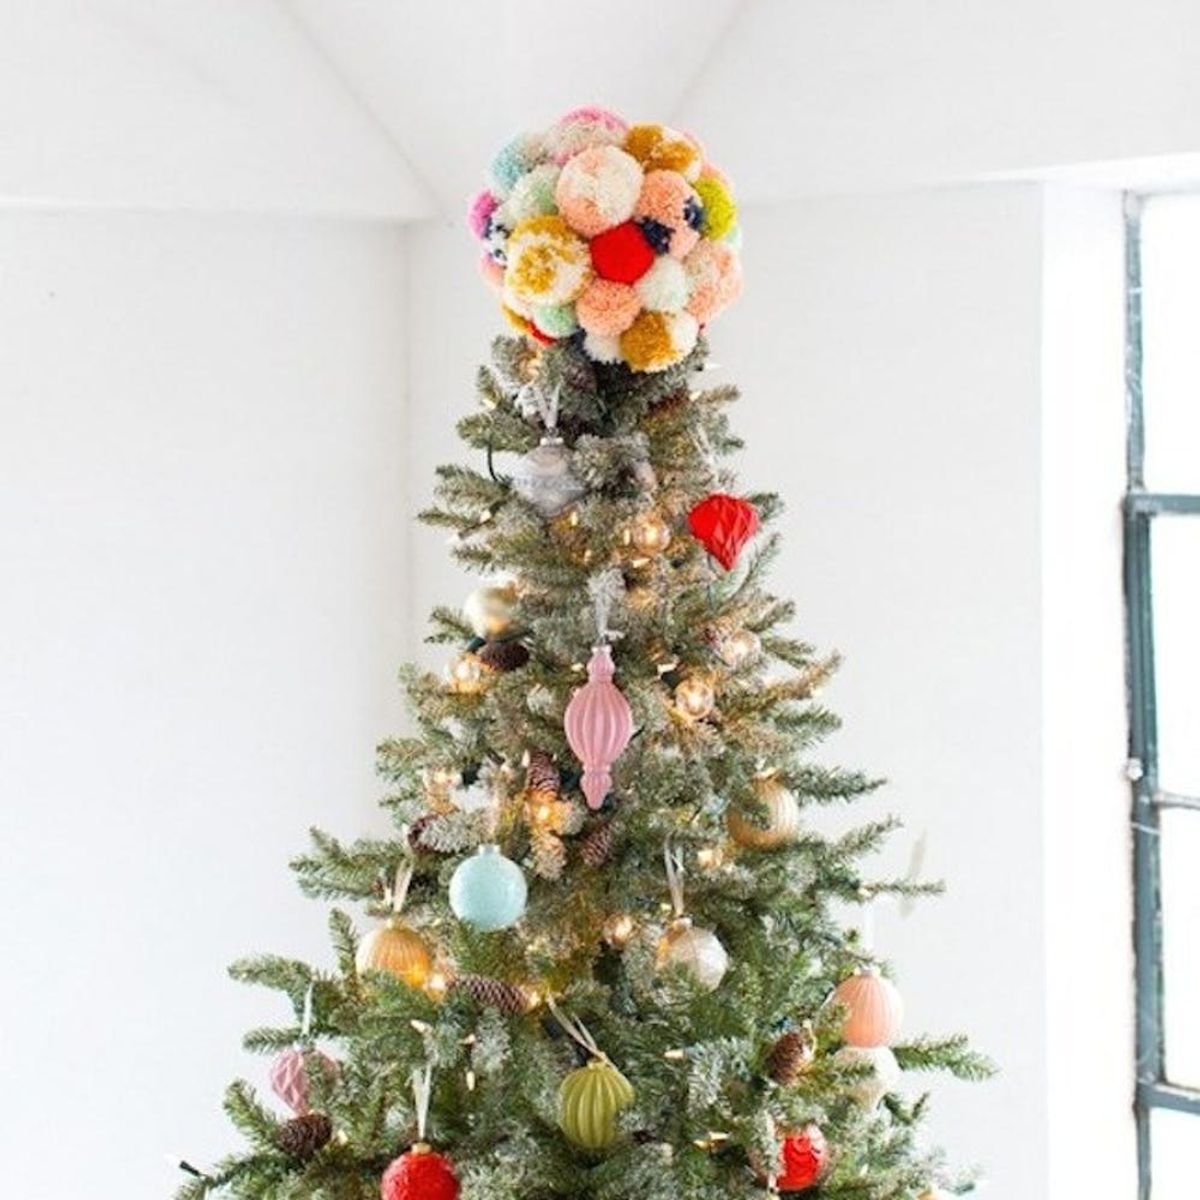 The 25 Best Christmas Tree Topper Ideas You Can Buy or DIY